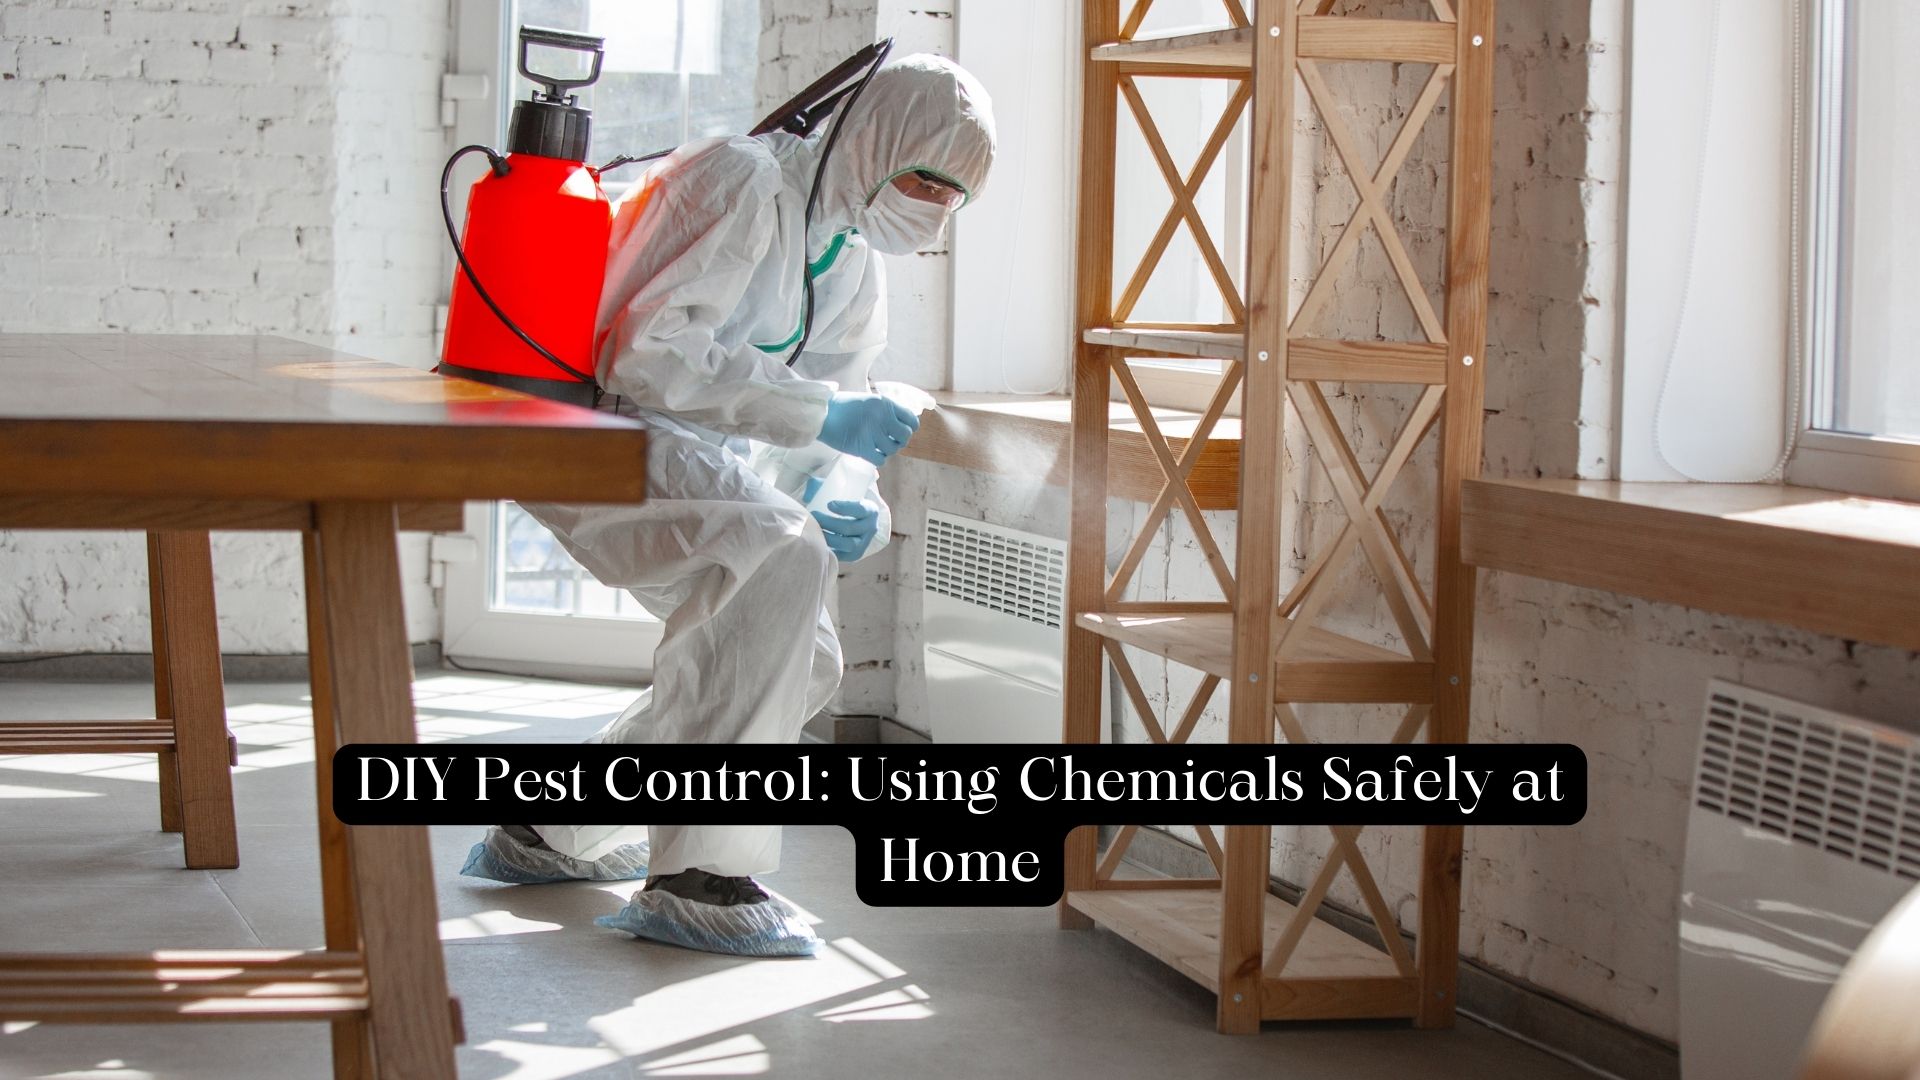 DIY Pest Control: Using Chemicals Safely at Home